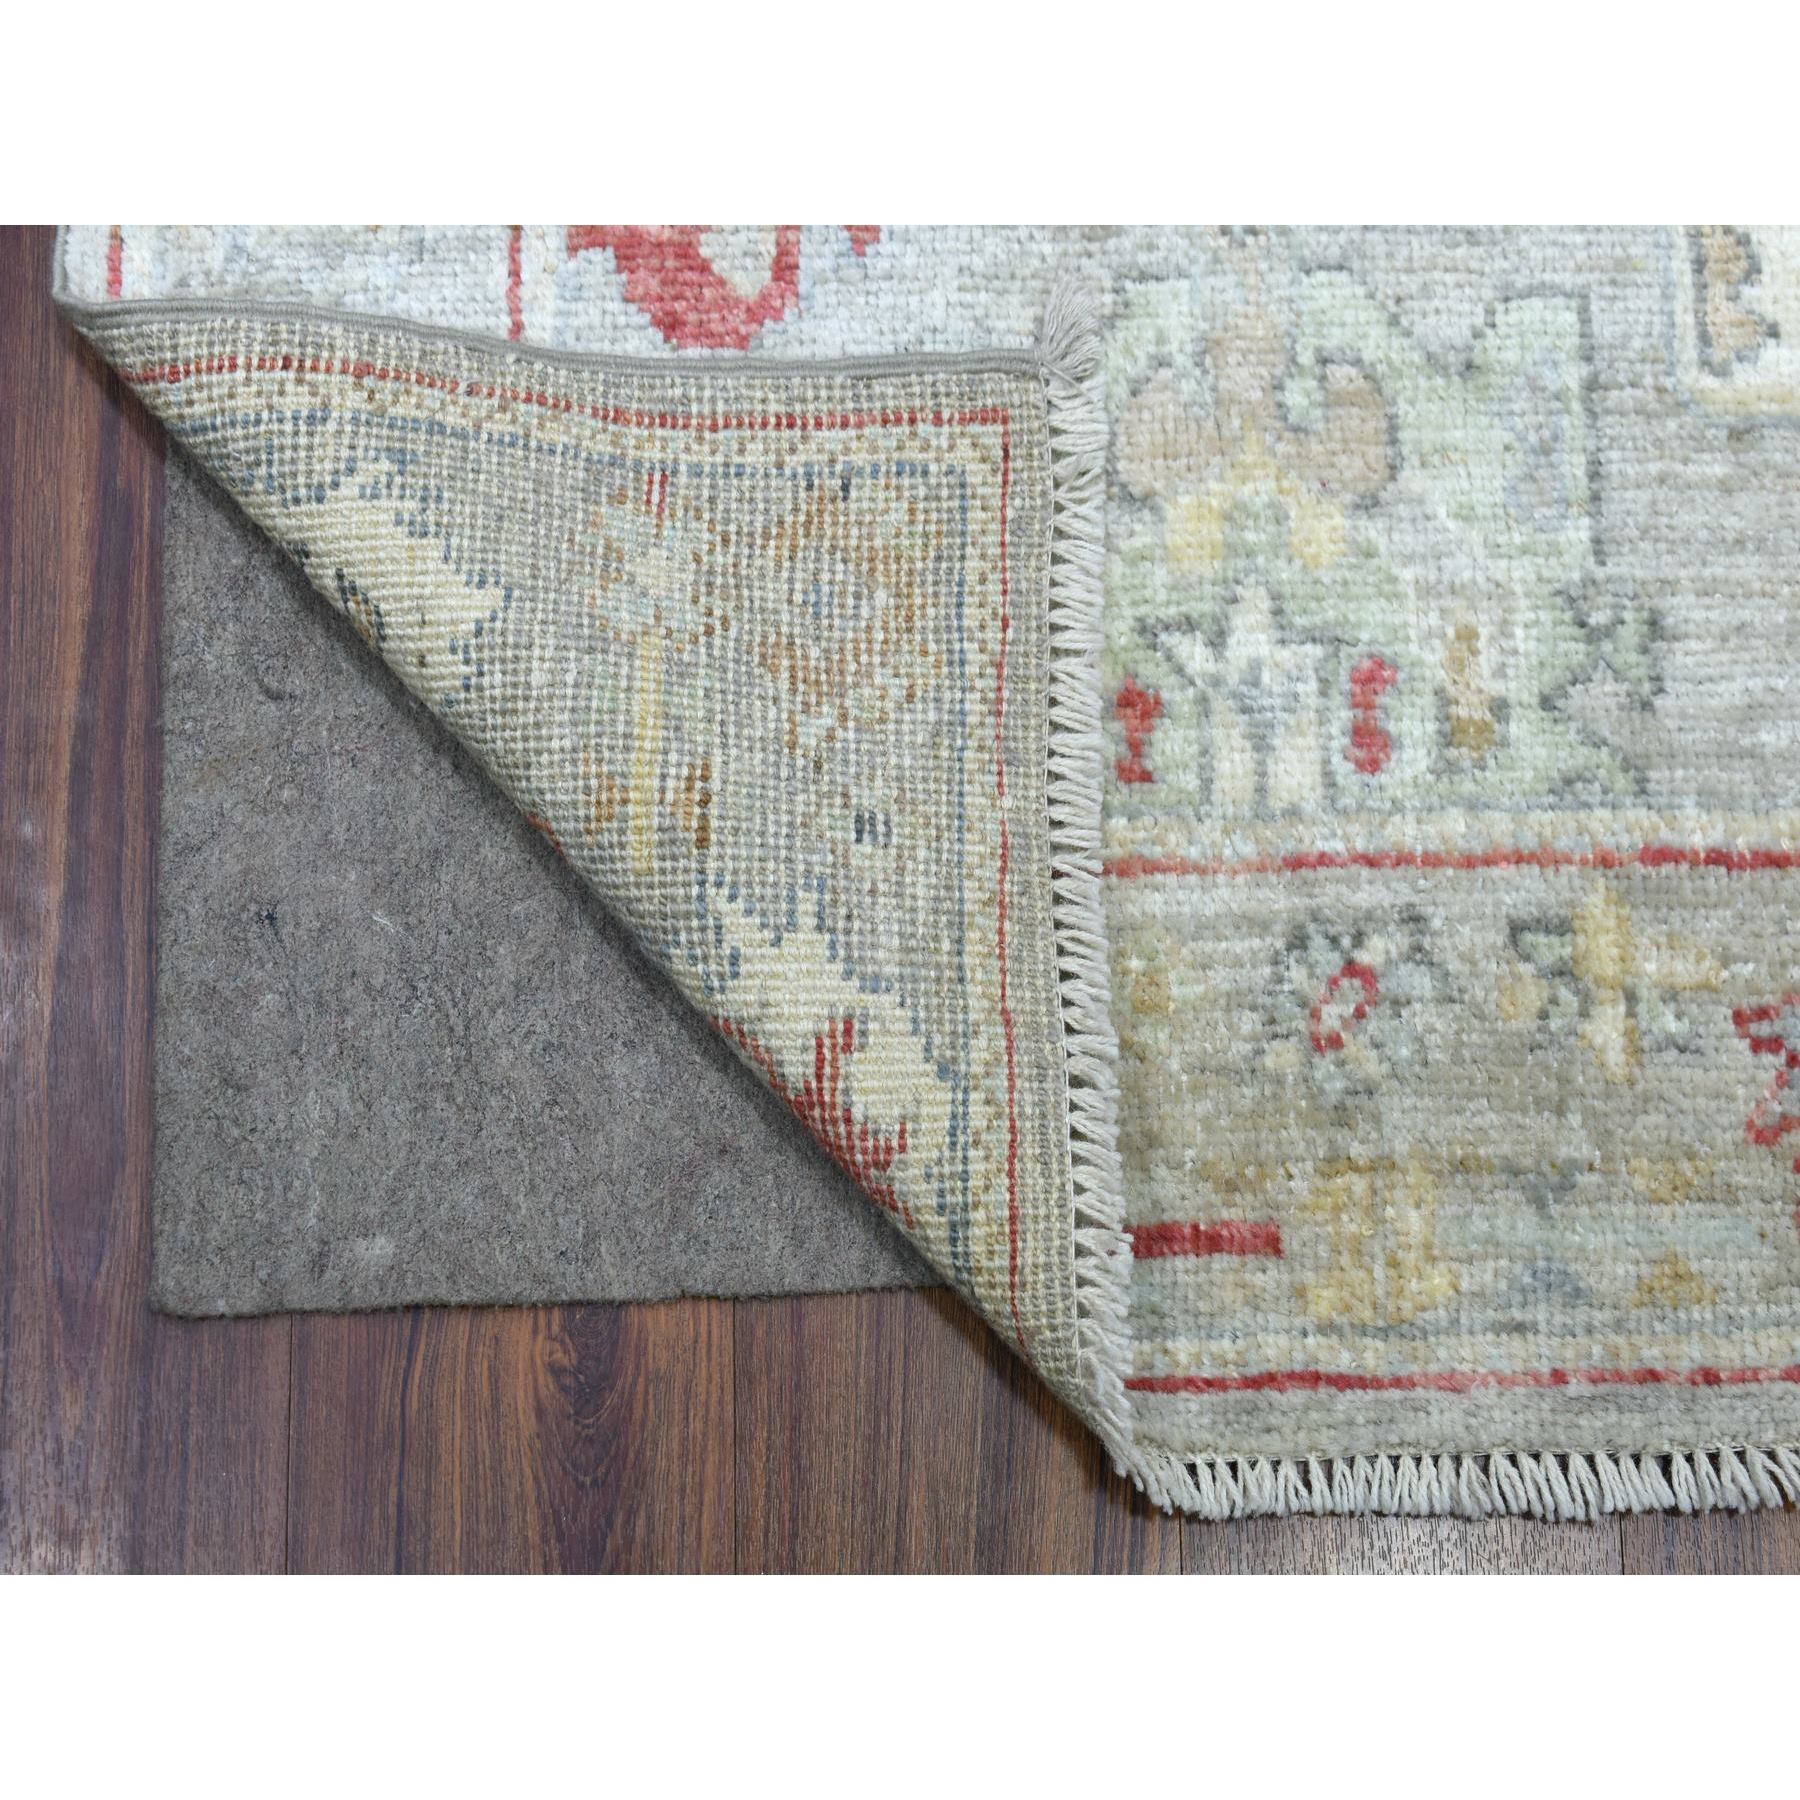 2'10"x17' Gray Afghan Angora Oushak with Touches of Red Hand Woven Natural Wool Oriental XL Runner Rug 